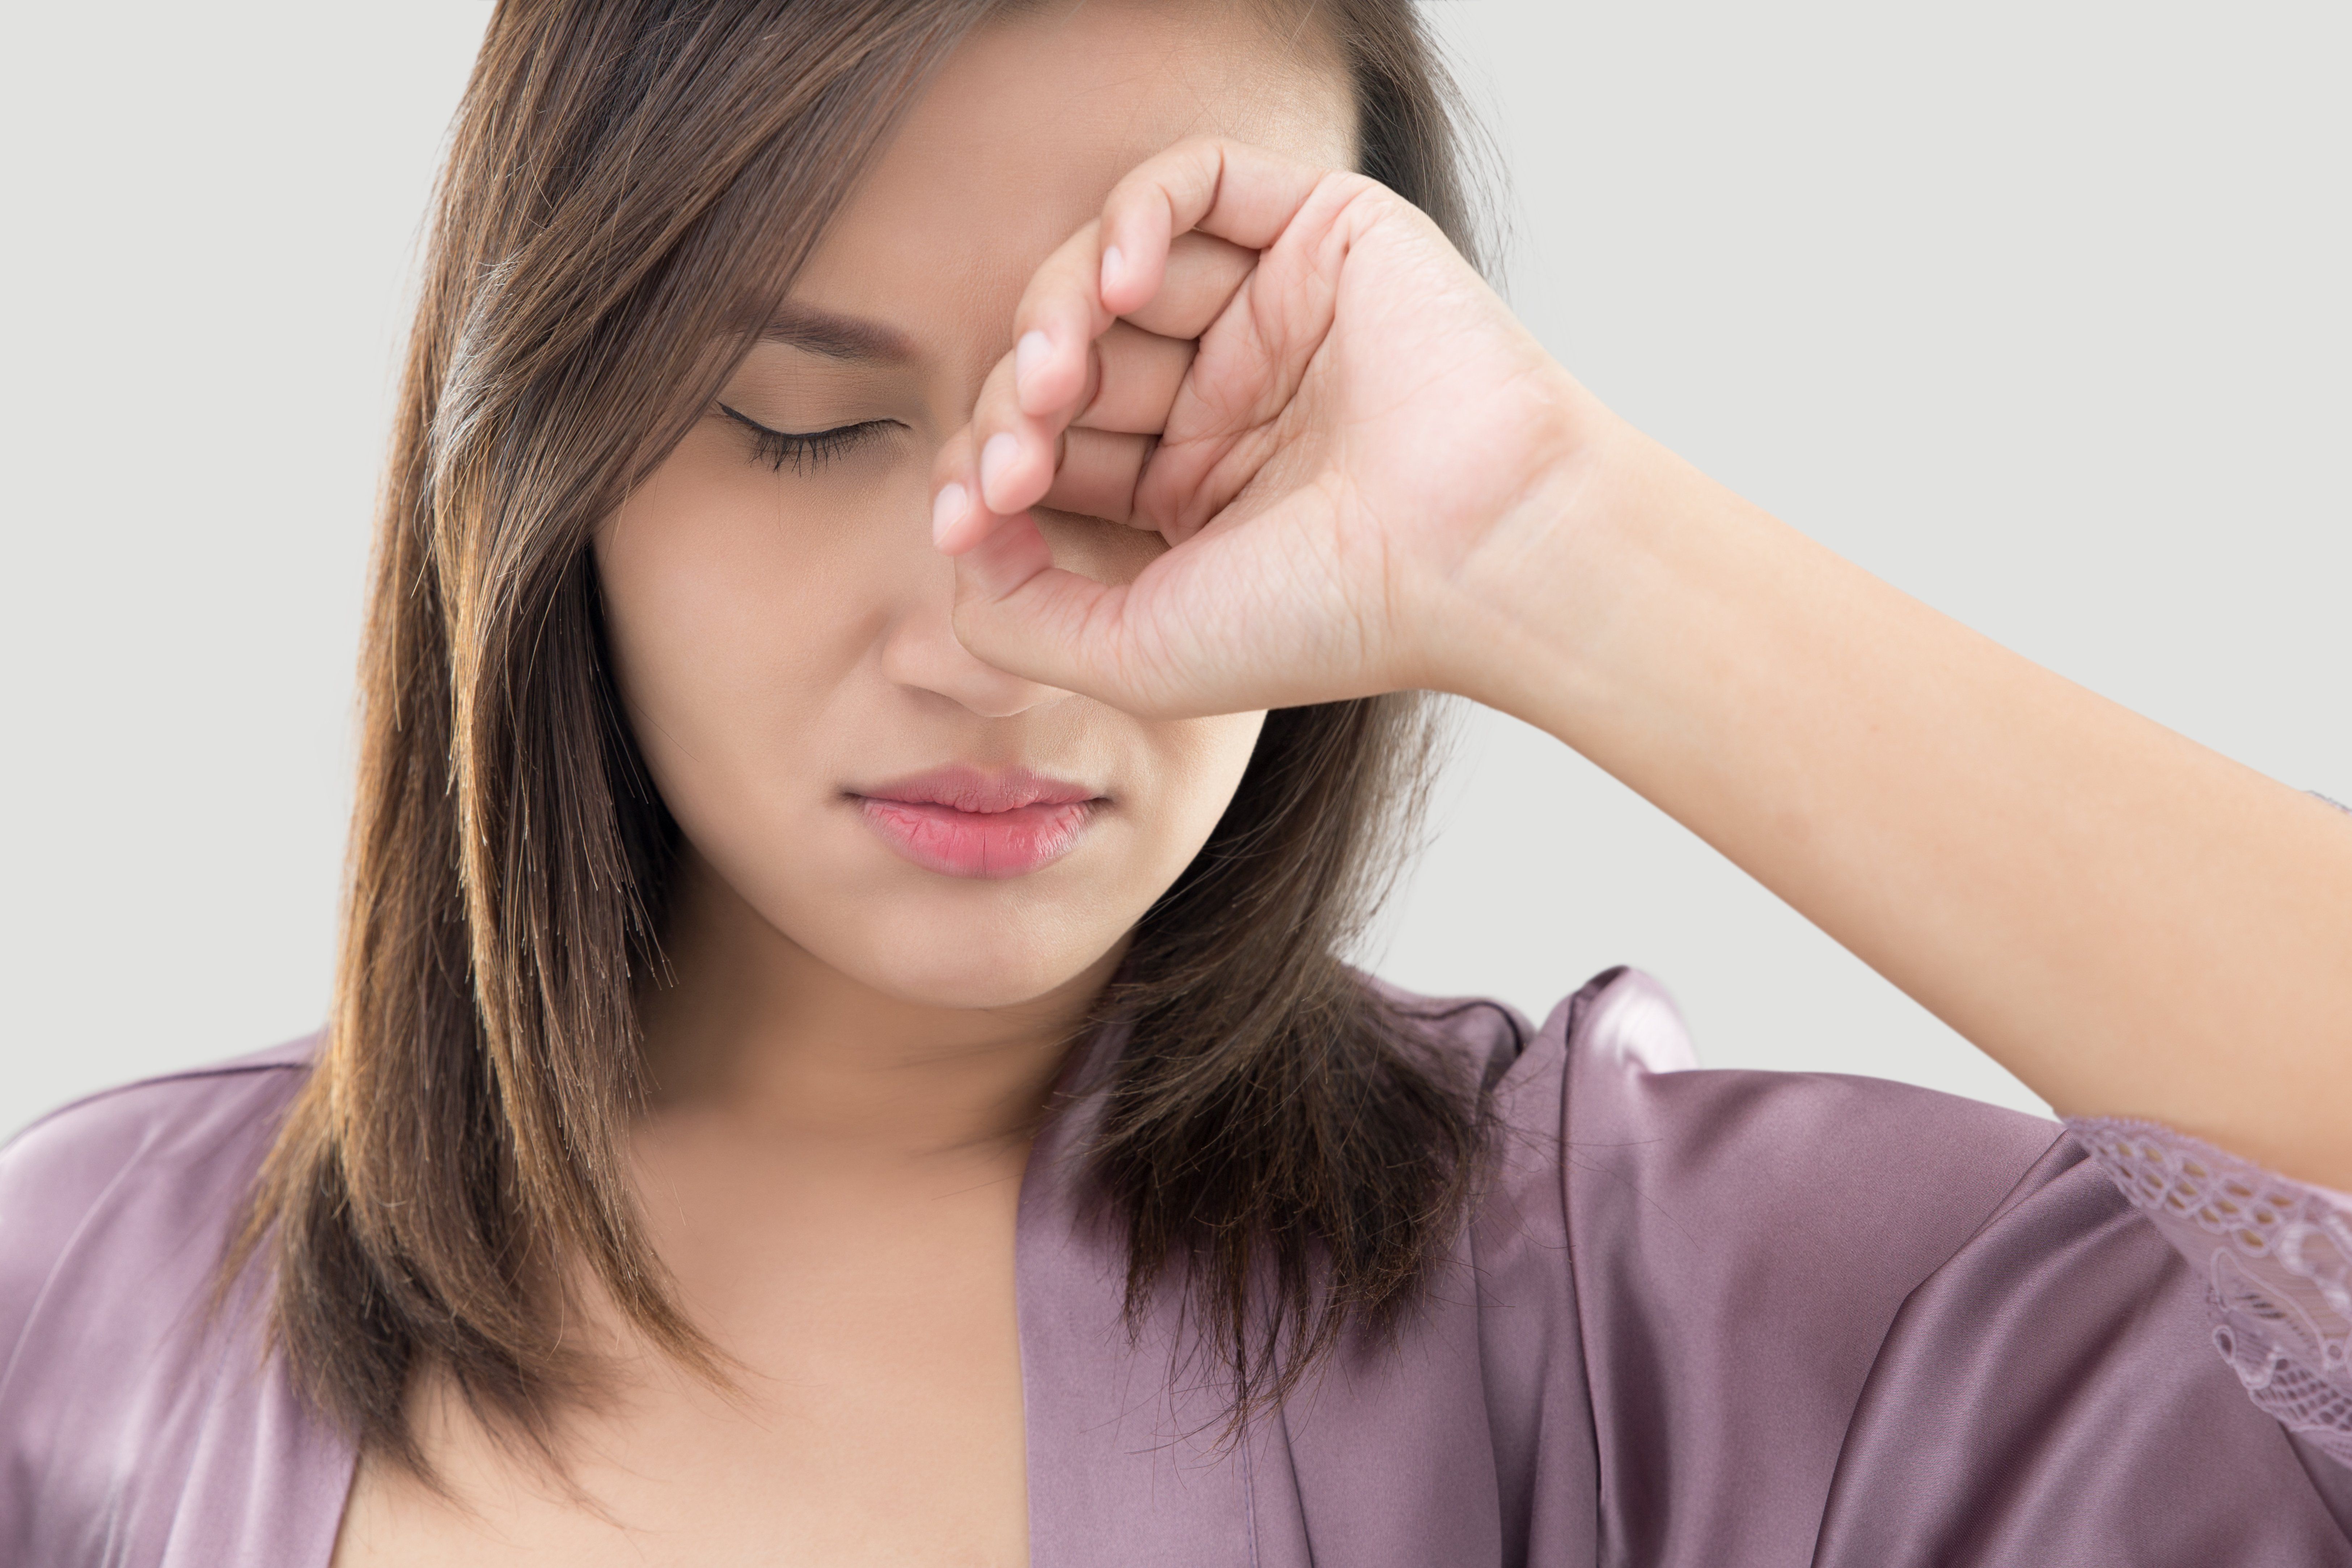 What Are the Common Symptoms of Dry Eye?